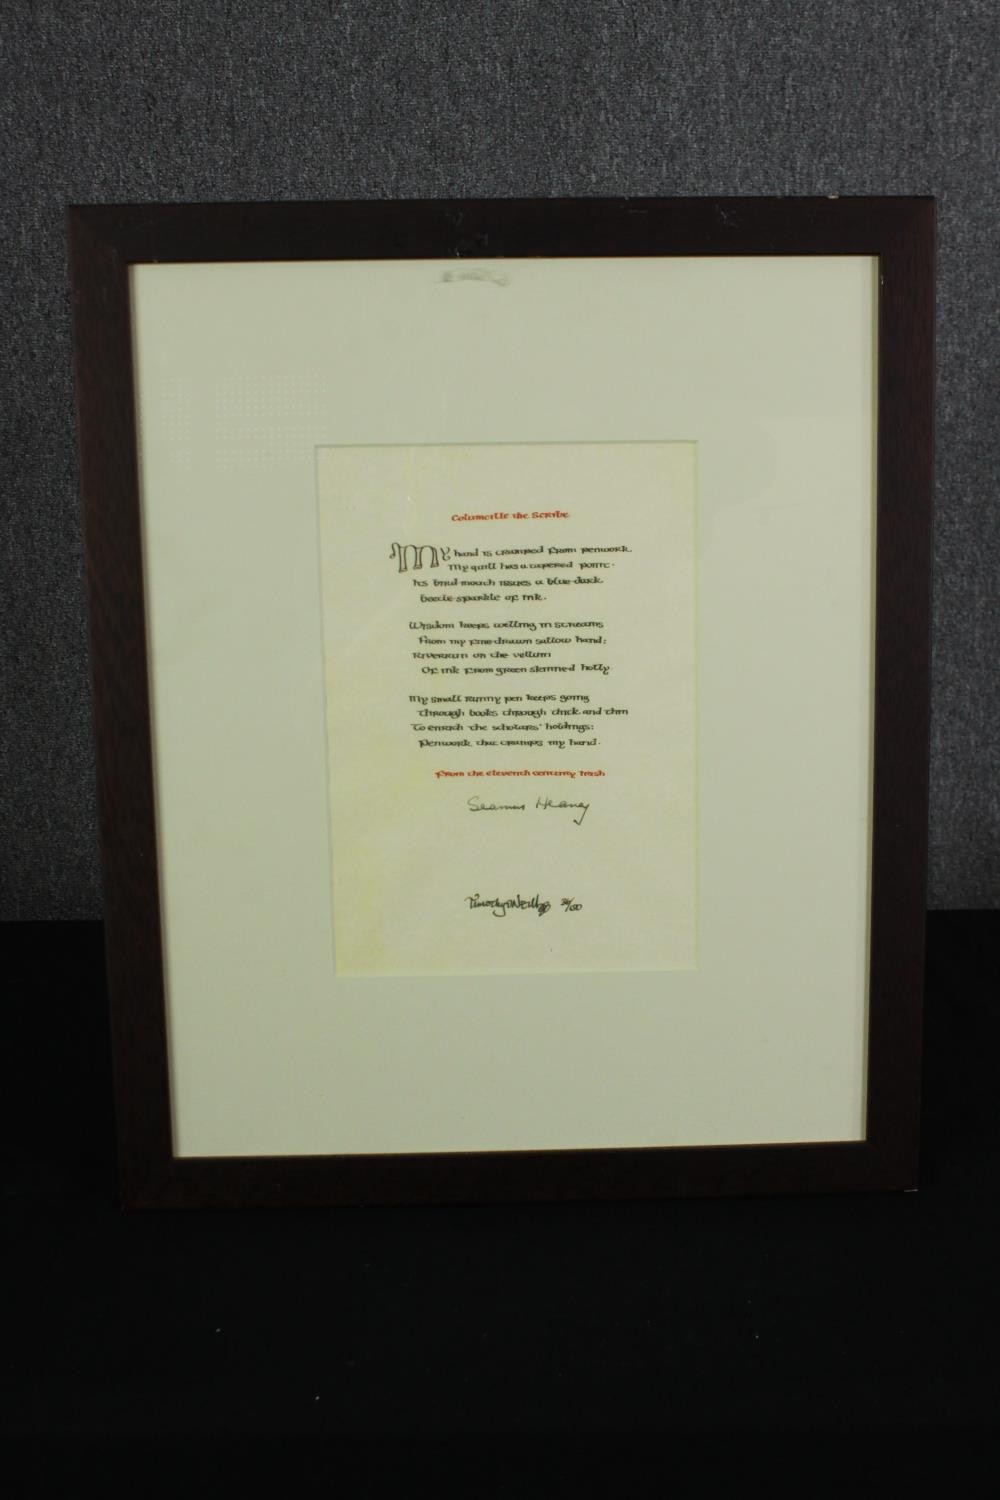 Seamus Heaney, Columcille the Scribe. A signed limited edition, 36/150, signed Timothy O'Neill, on - Image 2 of 4